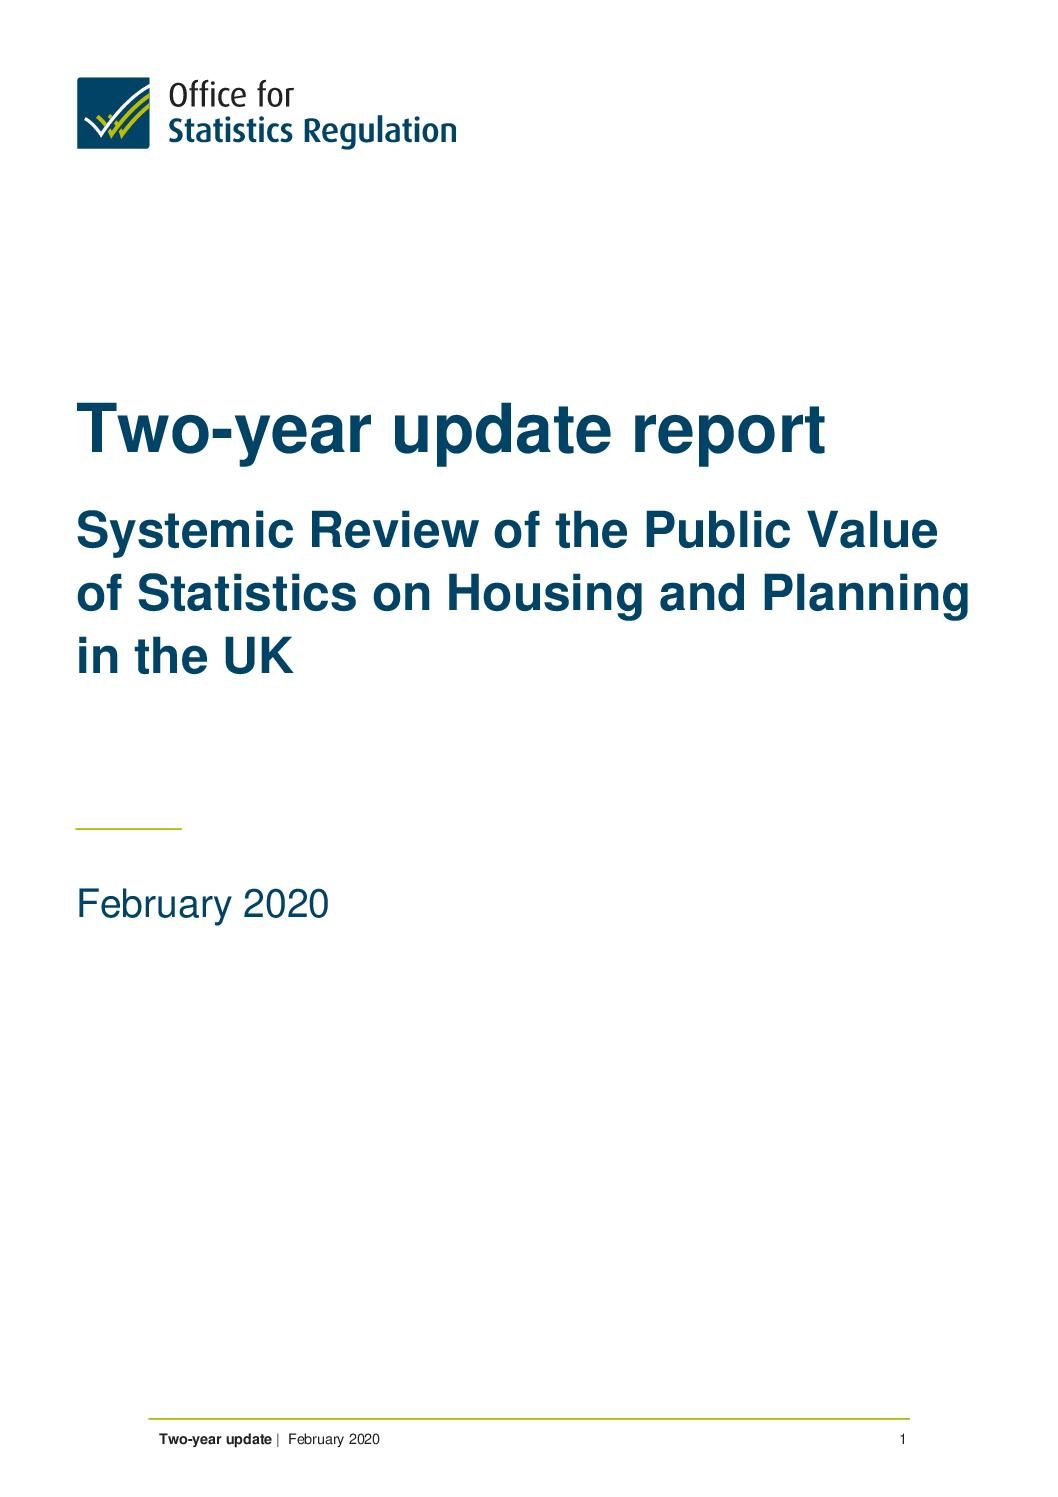 Two-year update: Public Value of Statistics on Housing and Planning in the UK